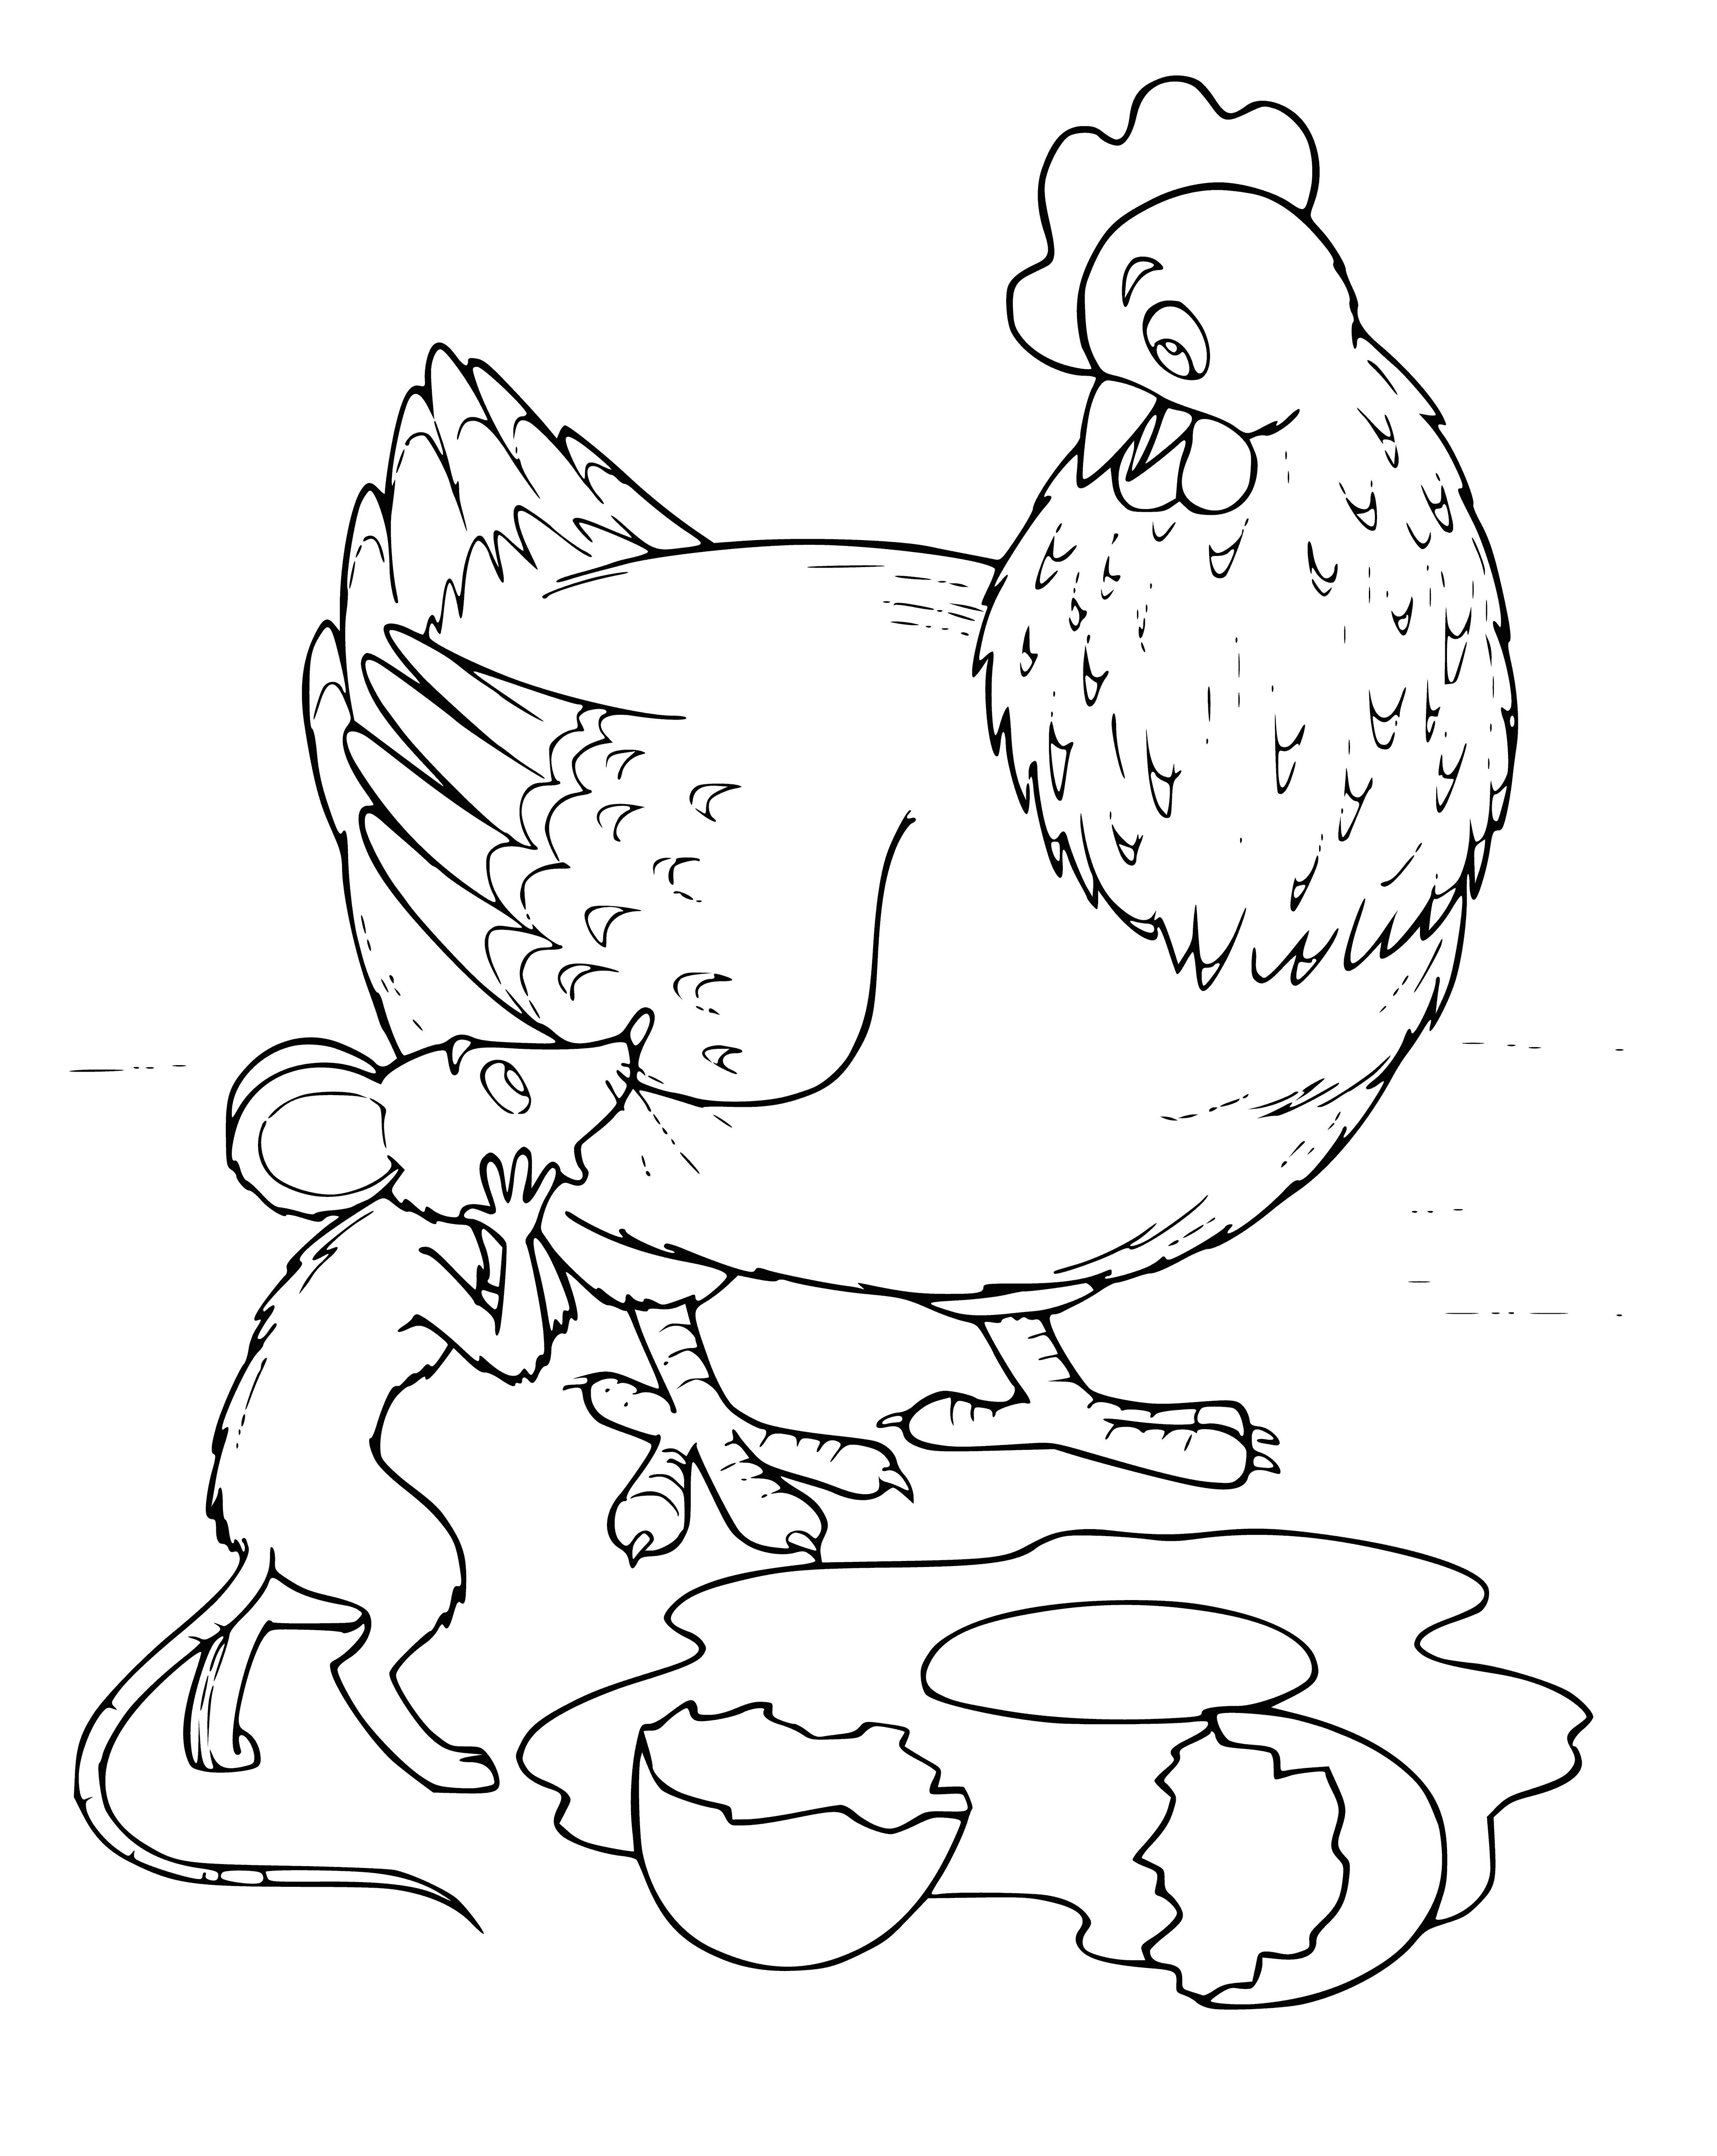 The testicle broke coloring page